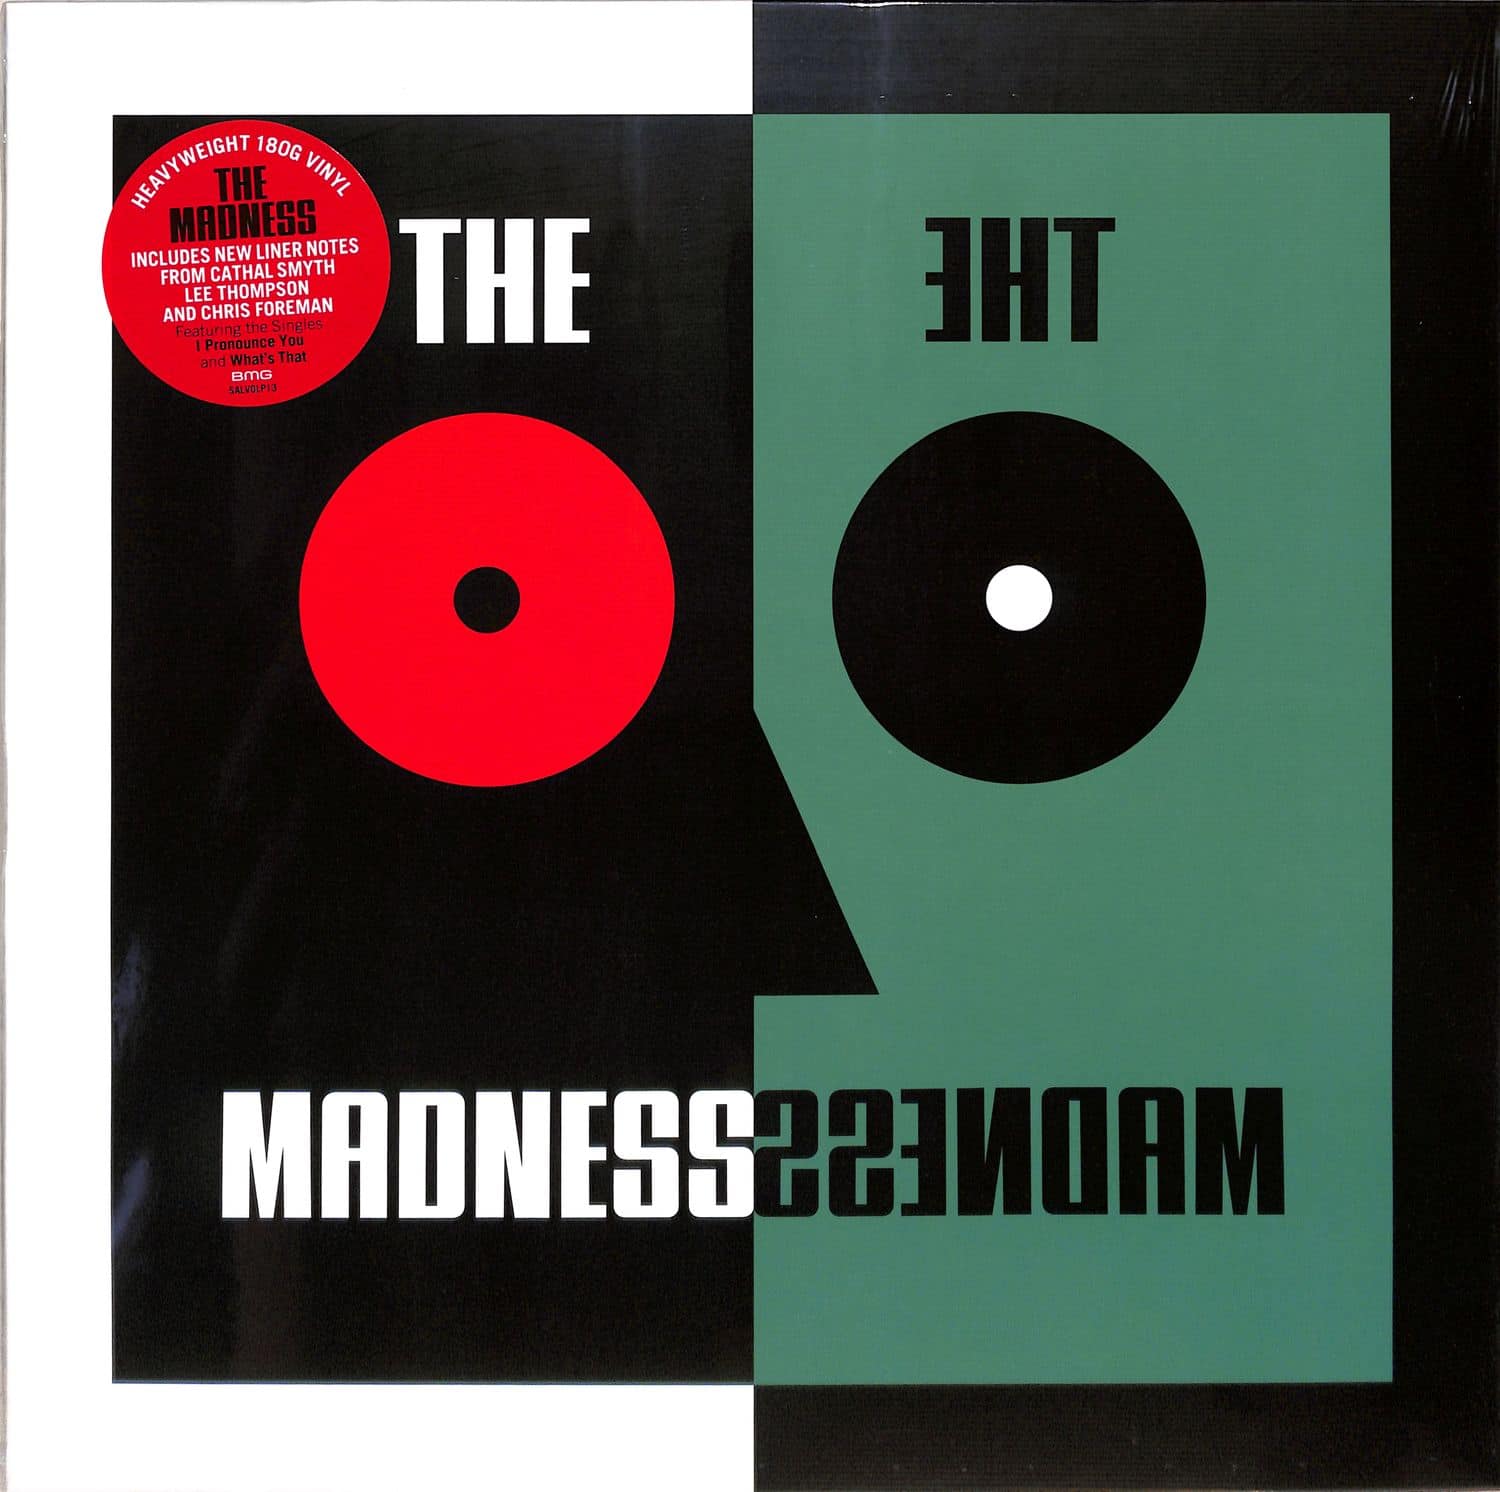 The Madness - THE MADNESS 